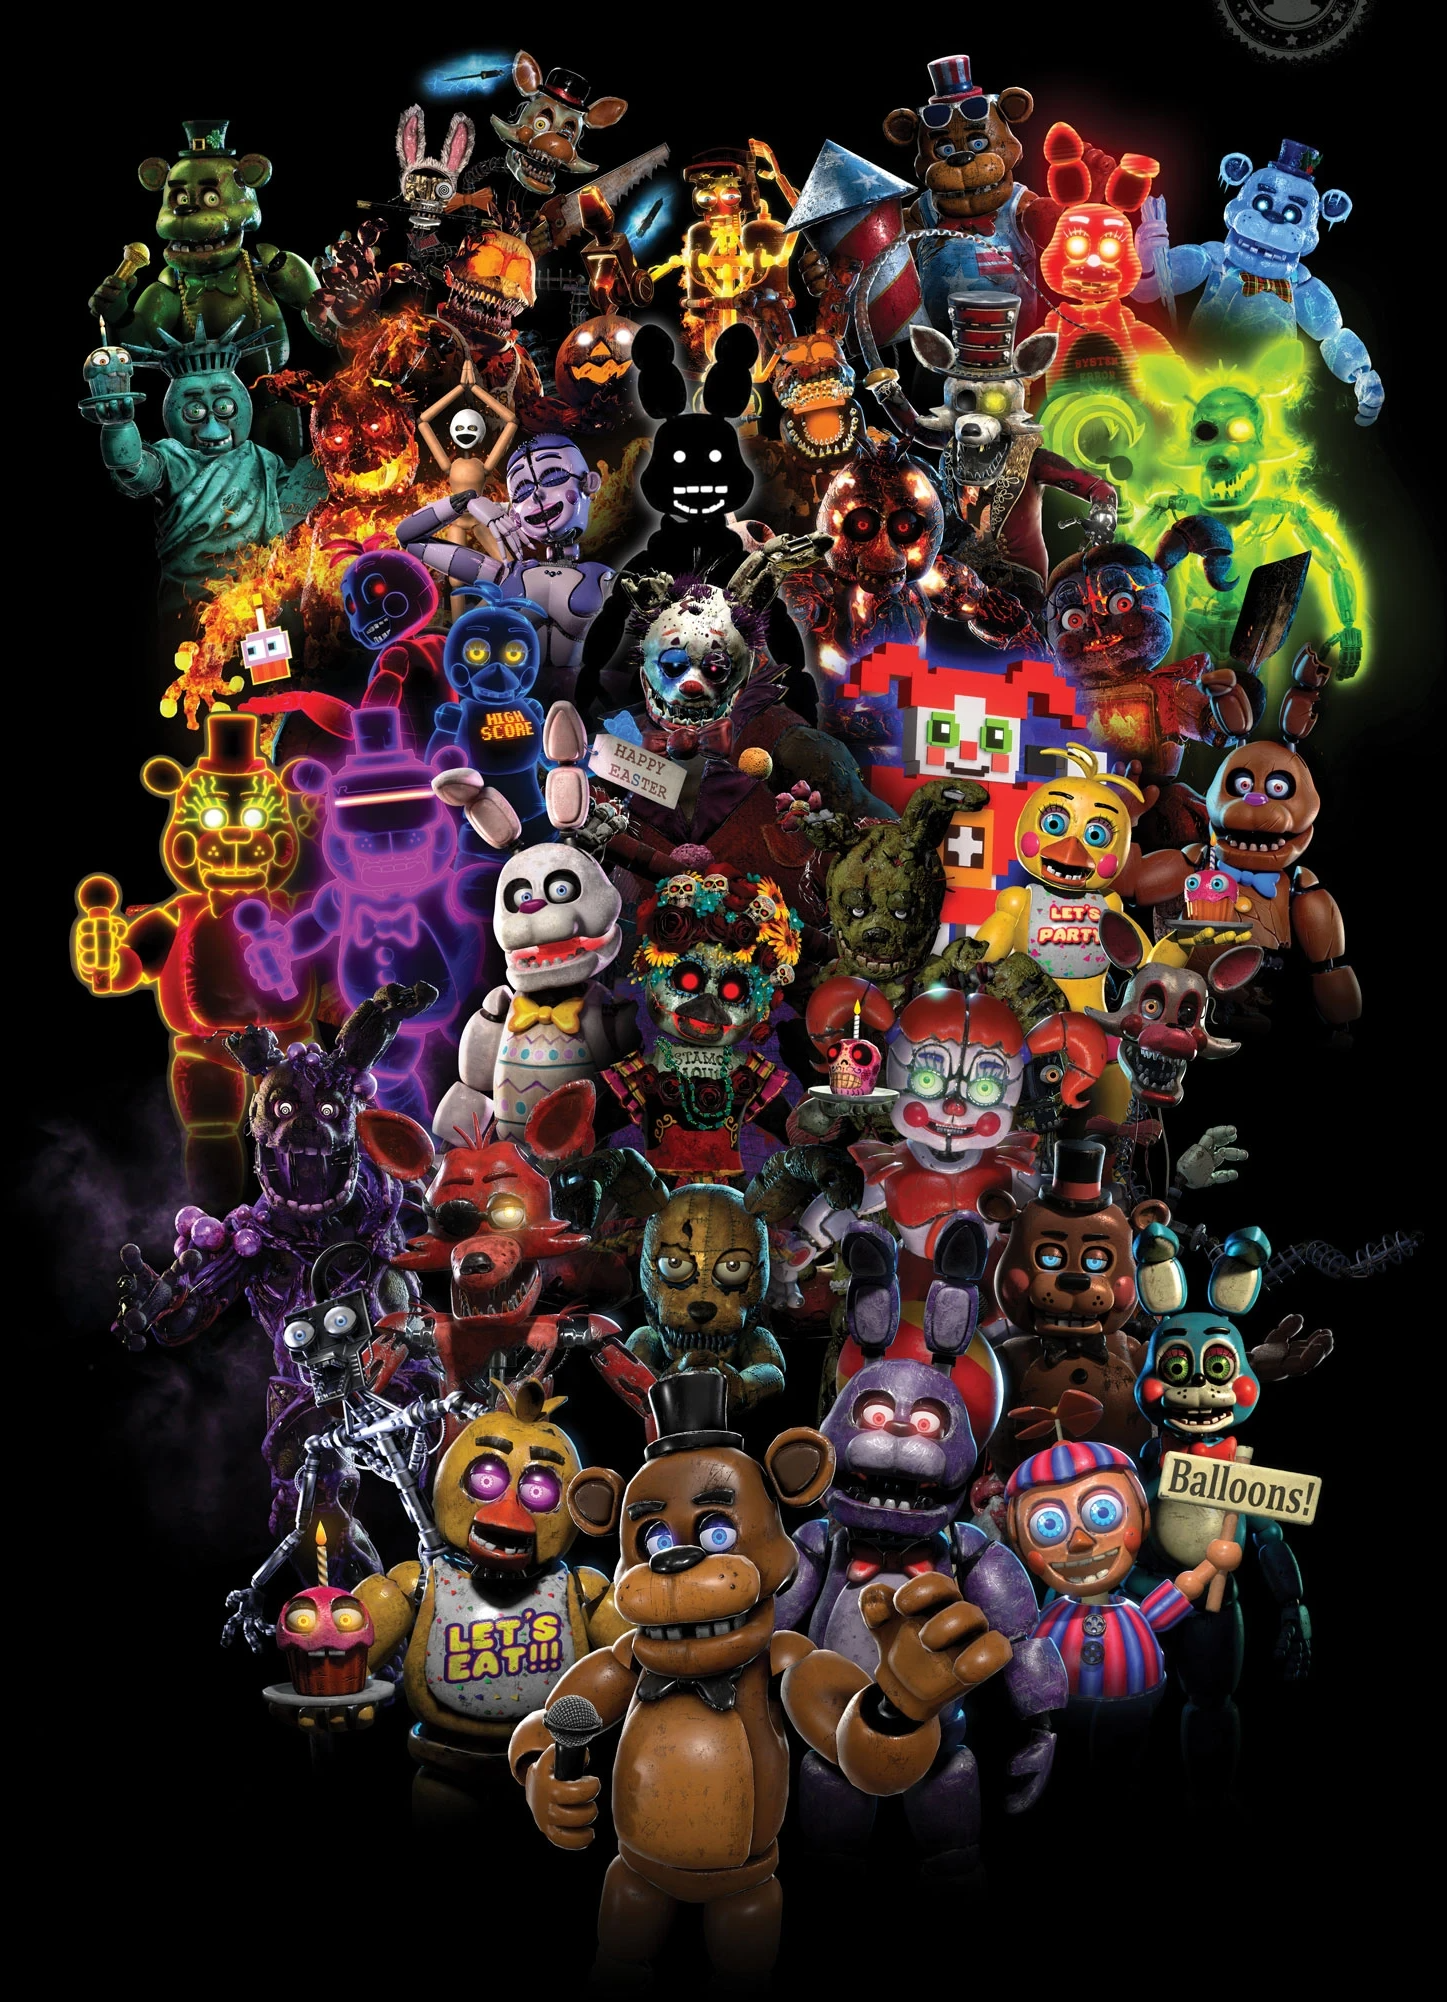 All Of The Animatronics In Five Nights At Freddy's Explained